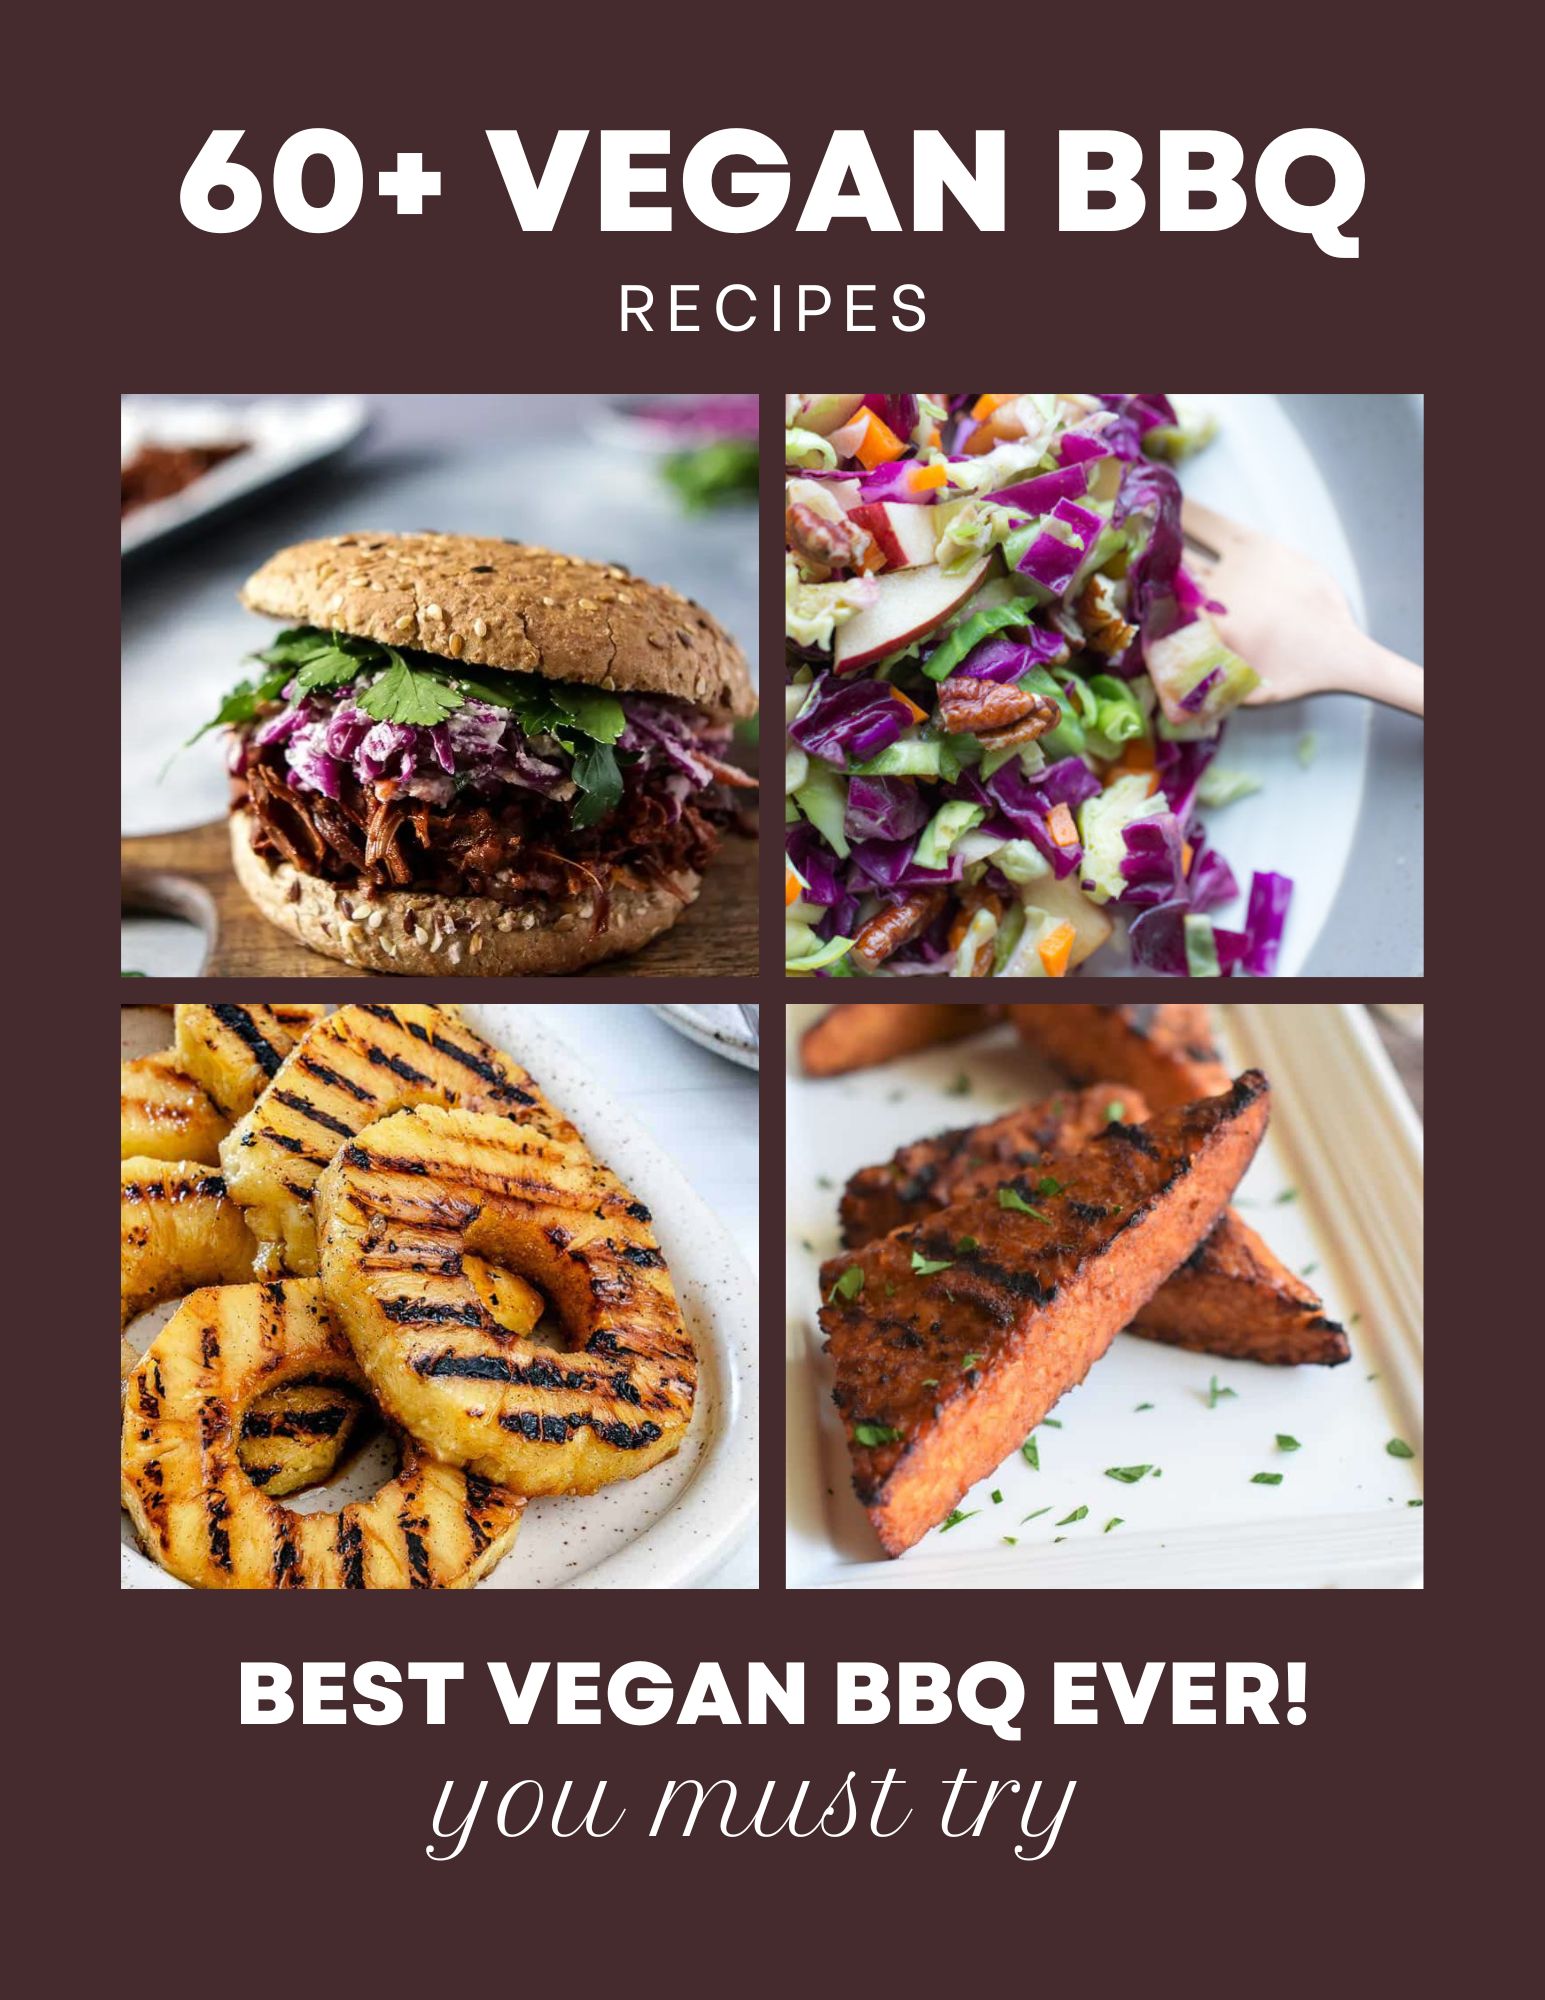 vegan bbq recipes like grilled pineapple, jackfruit burgers, brussel sprouts slaw, and vegan ribs